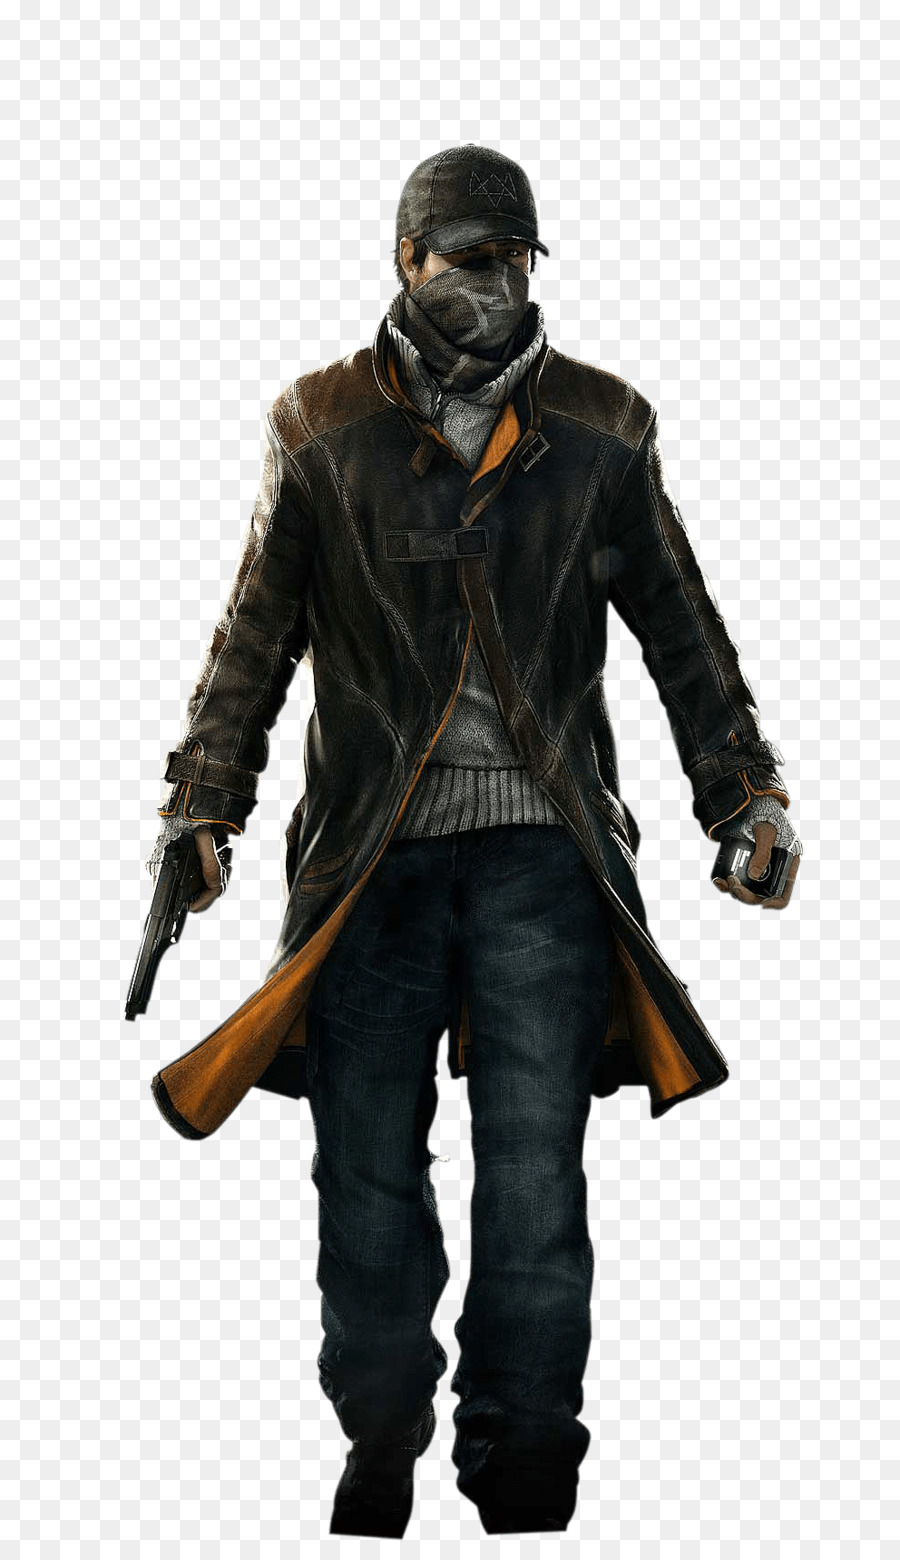 Watch Dogs 2 Aiden Pearce Costume Cosplay - assassin's creed origini icona